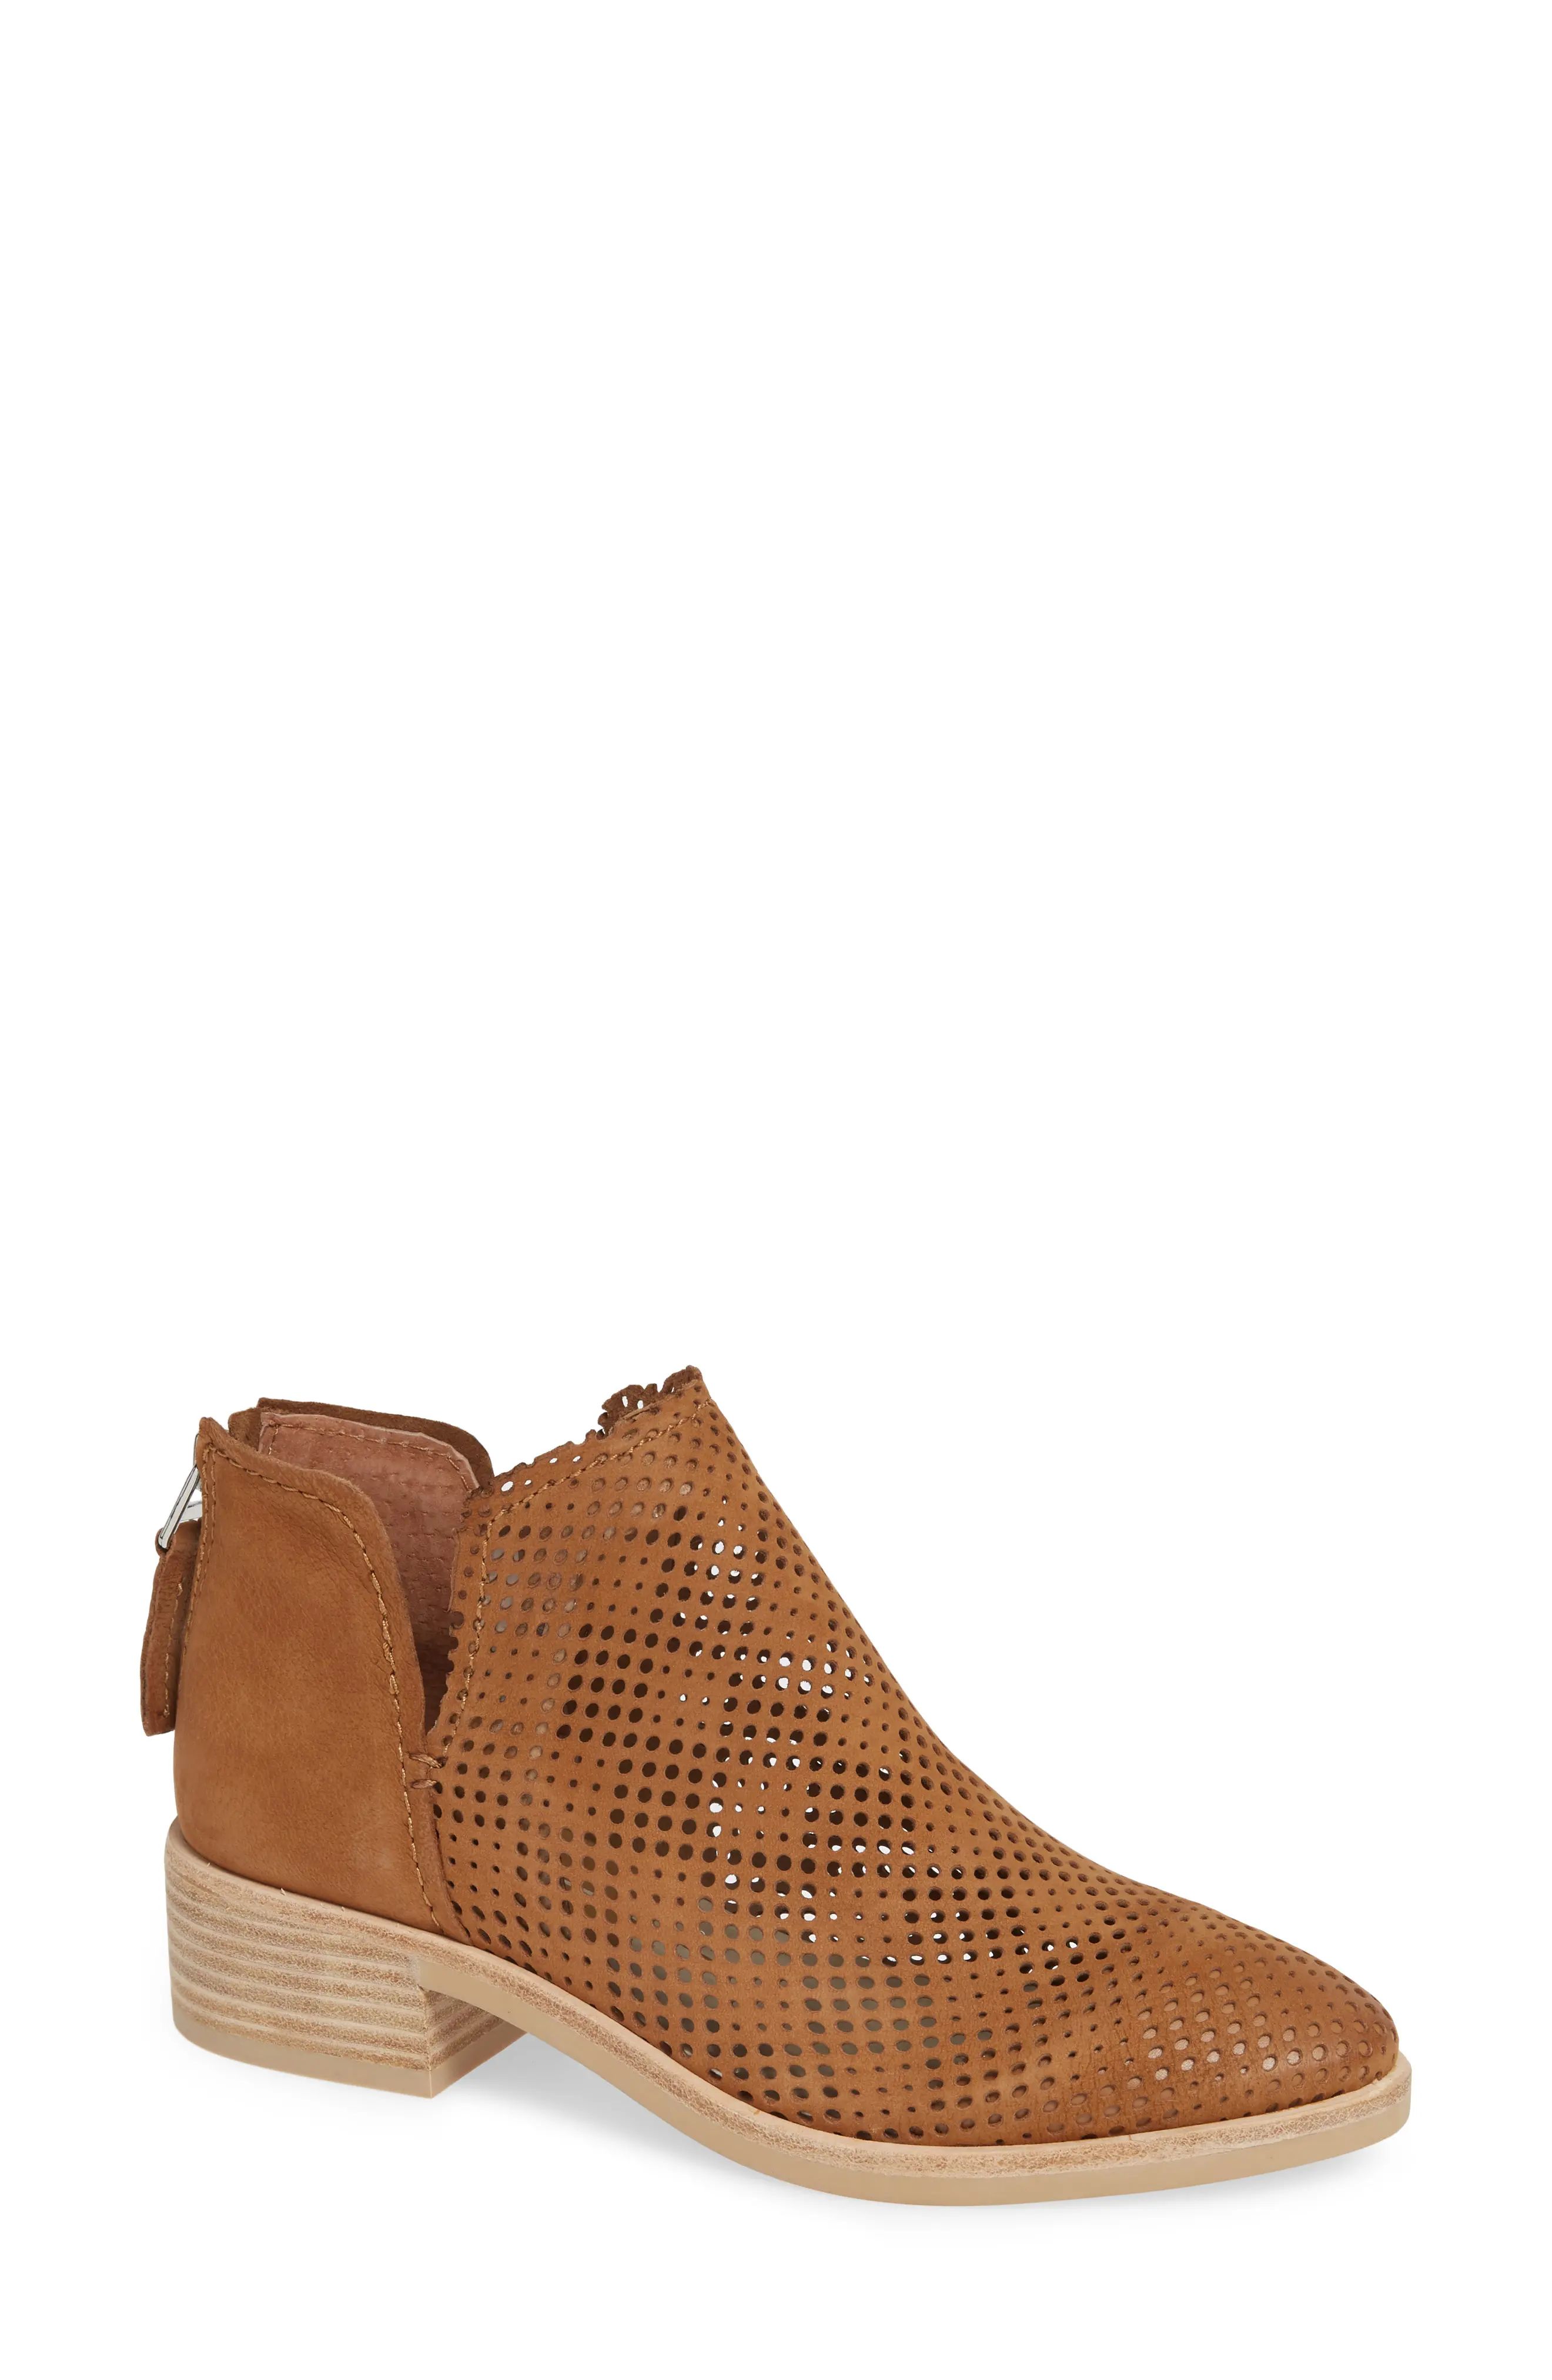 Women's Dolce Vita Tauris Perforated Bootie, Size 8 M - Brown | Nordstrom